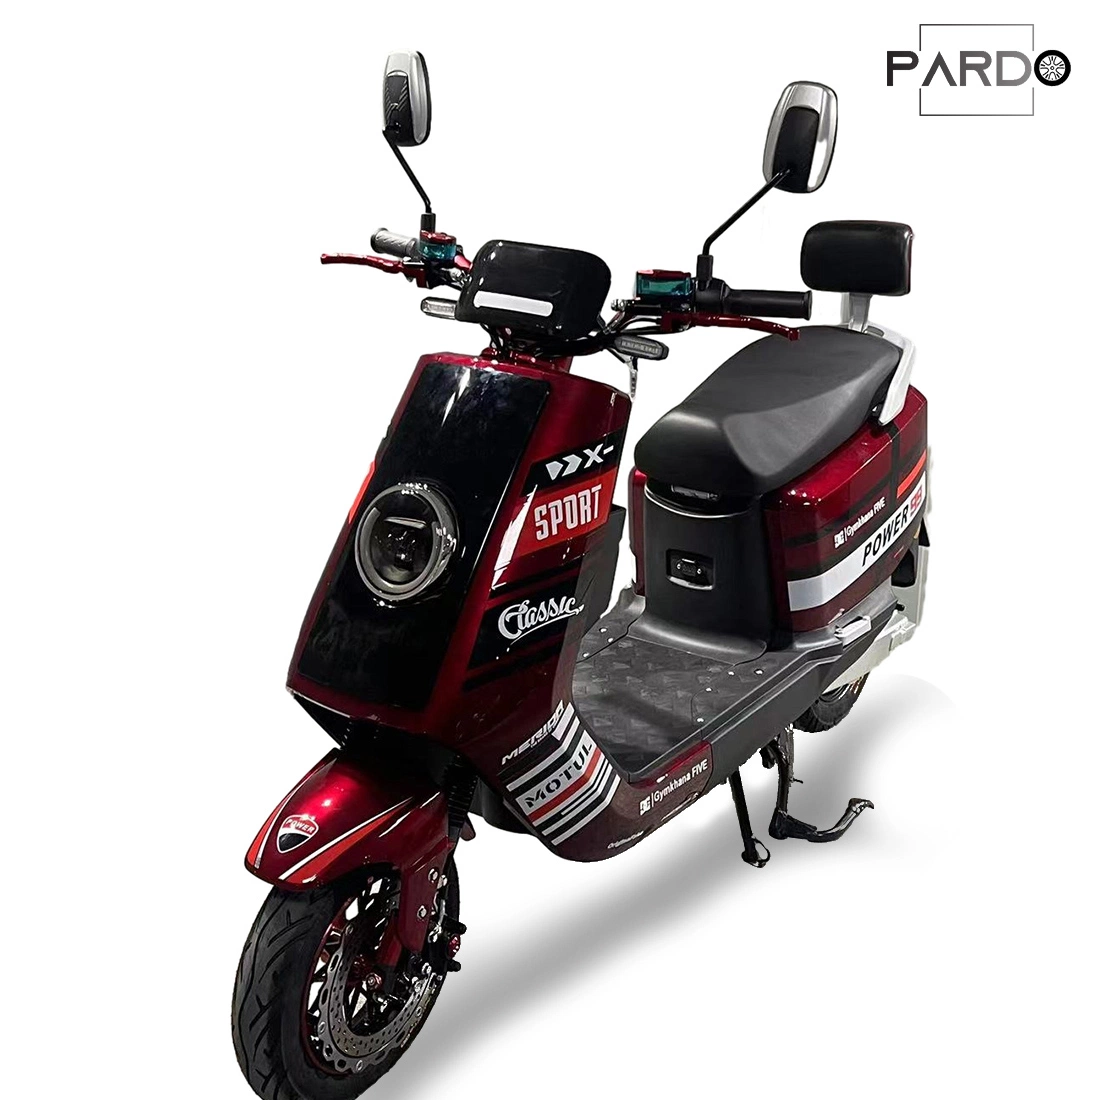 Pardo Xkn High Speed E-Bicycle with Stylish Design and Lead Acid Battery